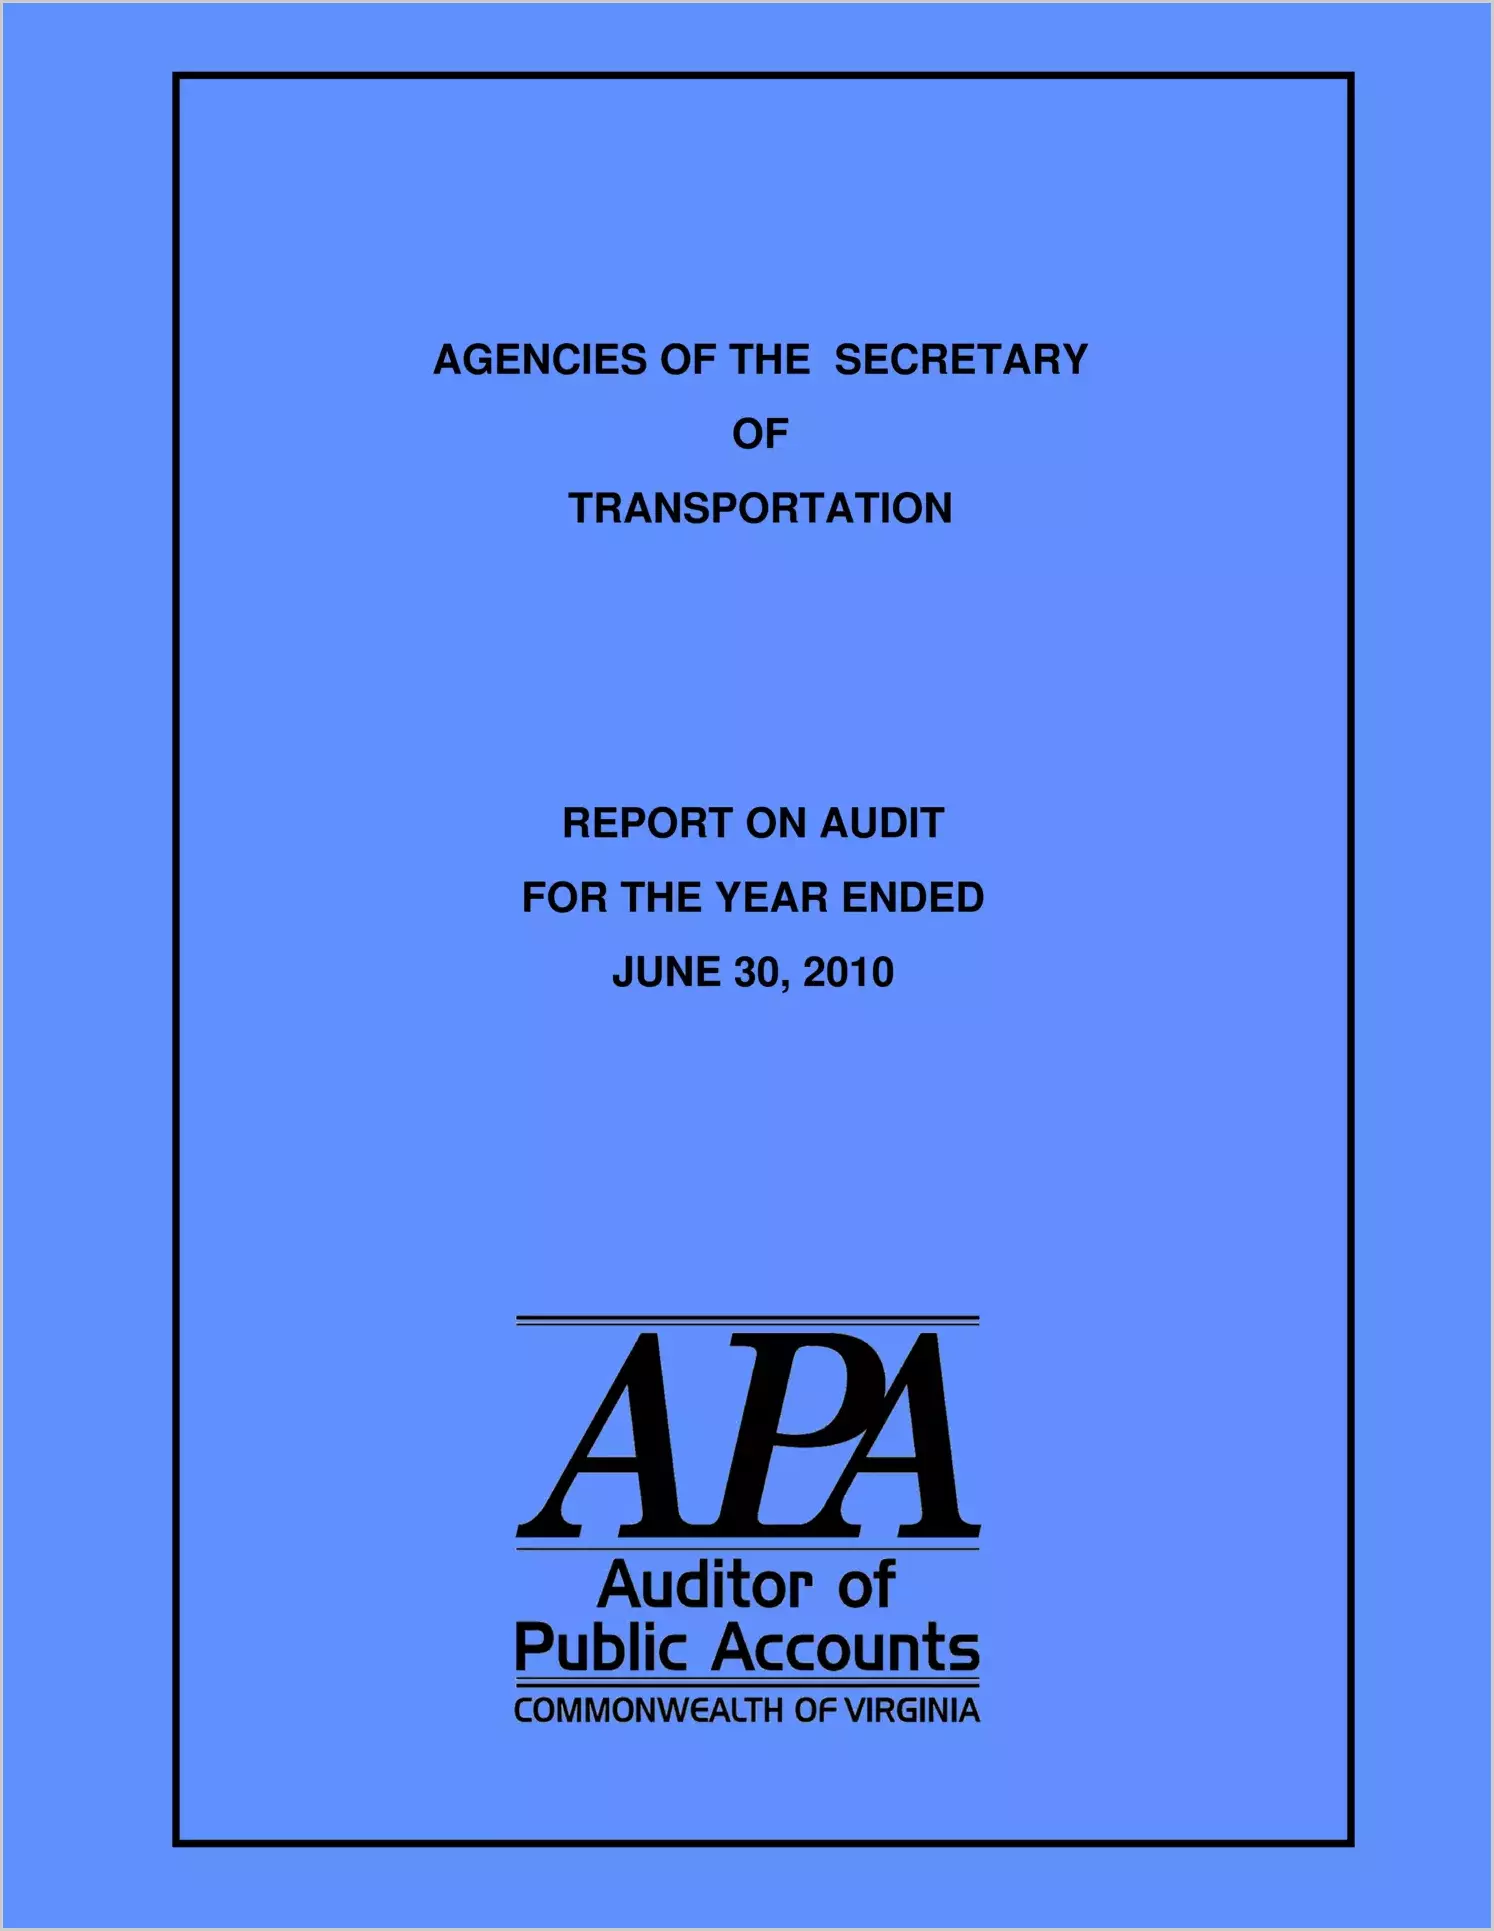 Agencies of the Secretary of Transportation for the year ended June 30, 2010